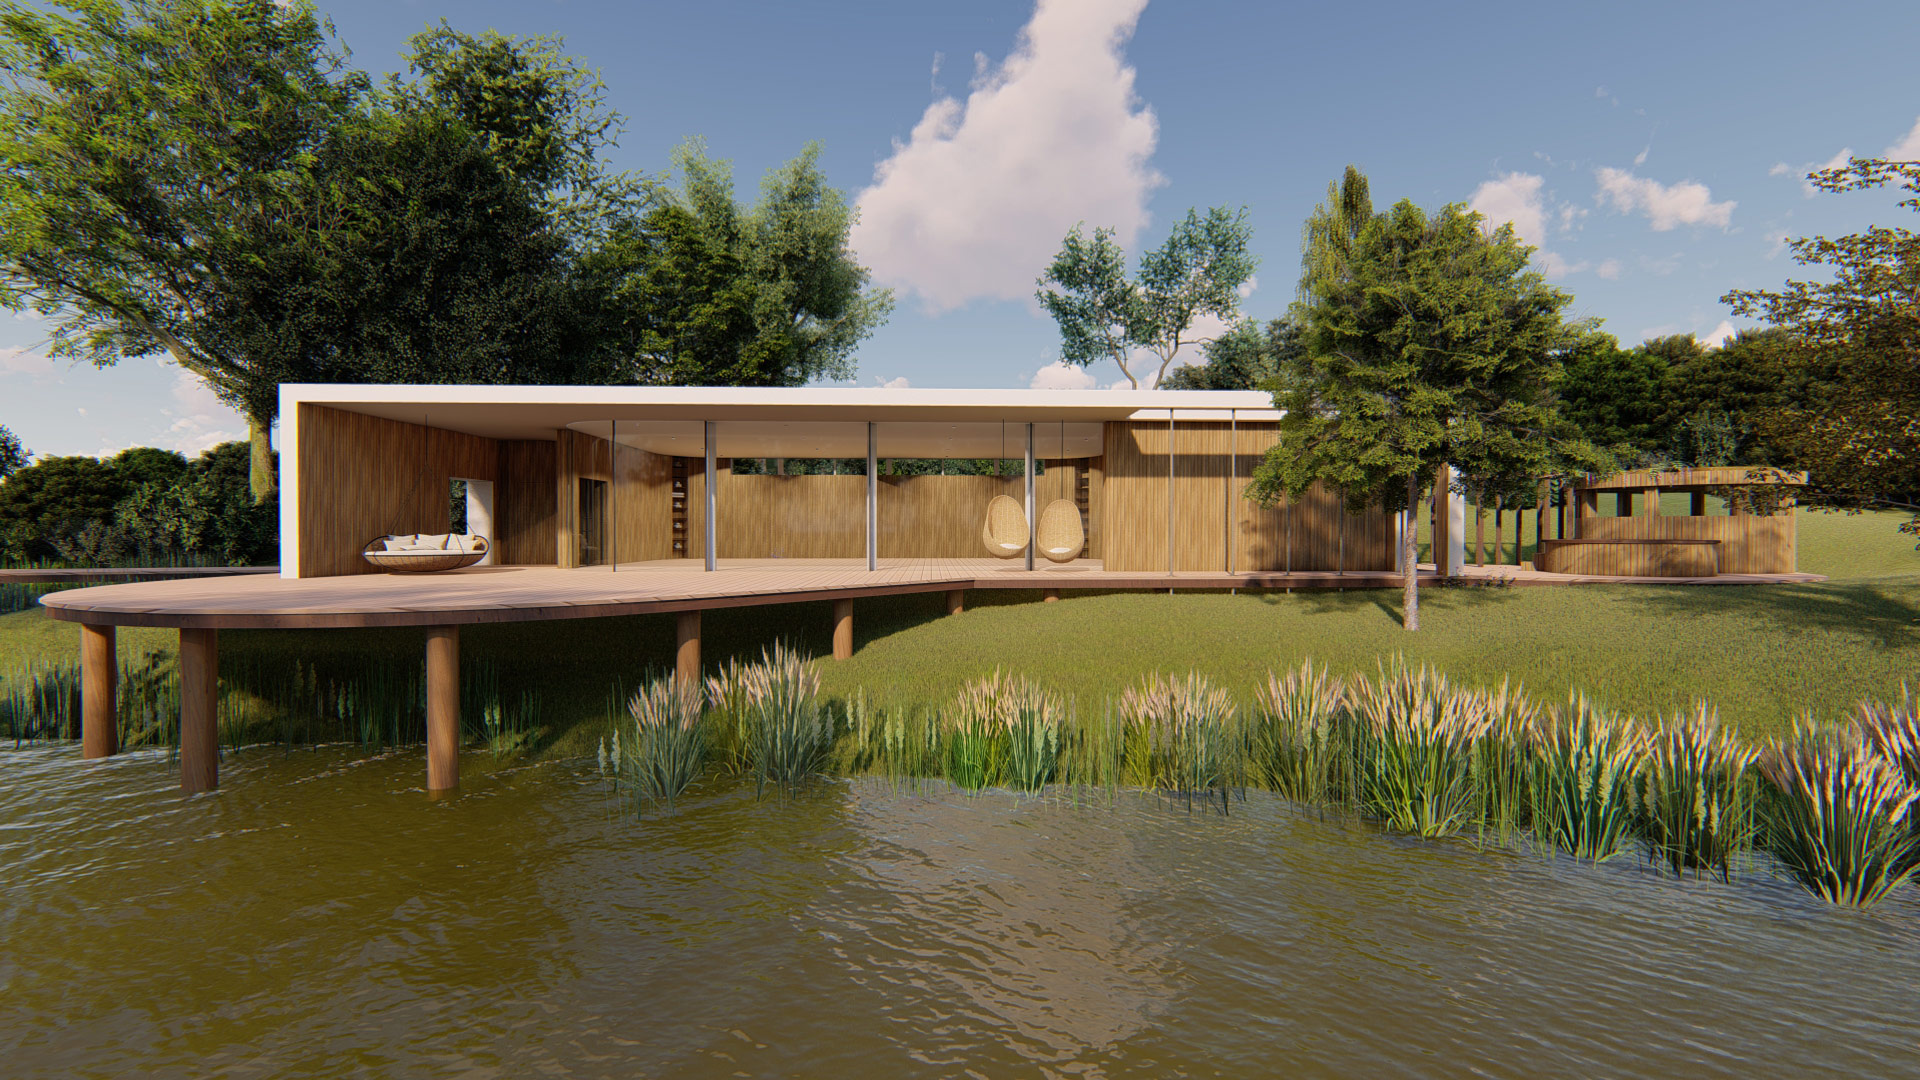 front view visual of yoga studio surrounded by trees with pond in front